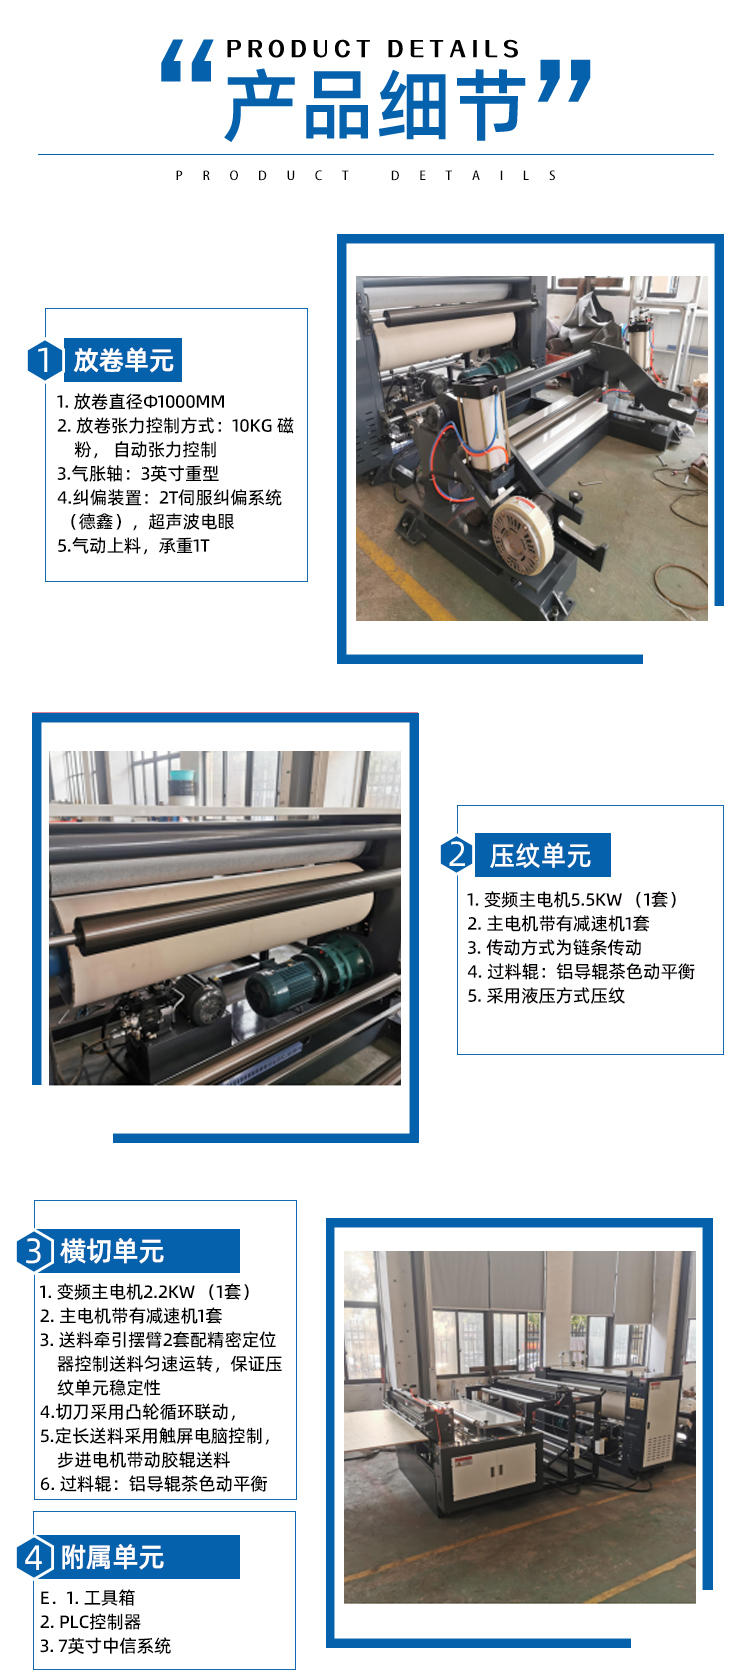 1200 type double discharge cross cutting machine Juniu mechanical supply paper fully automatic feeding